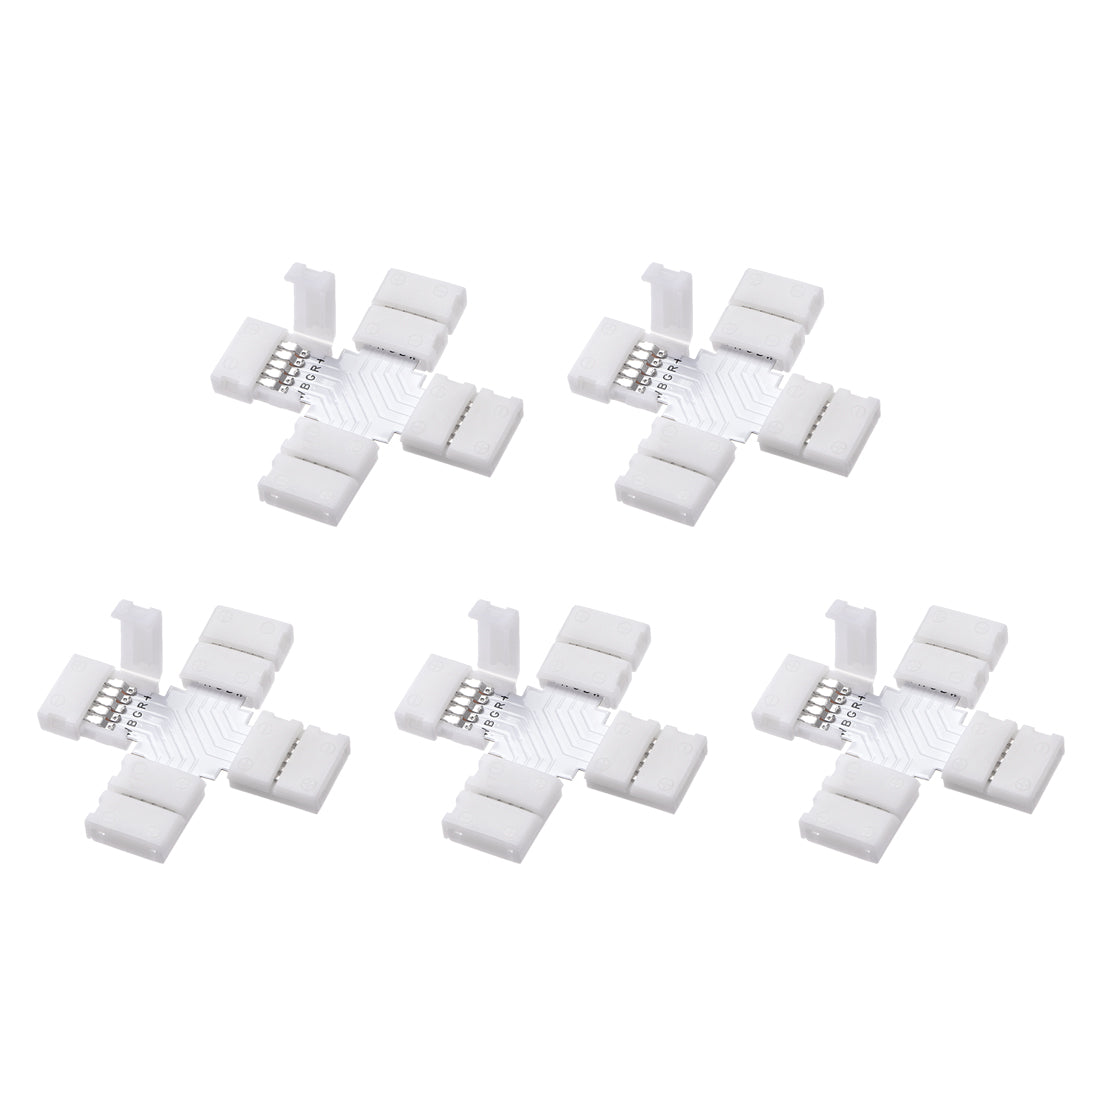 Uxcell Uxcell 10mm 5P L-shape Connector for 5050 3528 RGBW 5 Conductor LED Strip Lights 20Pcs